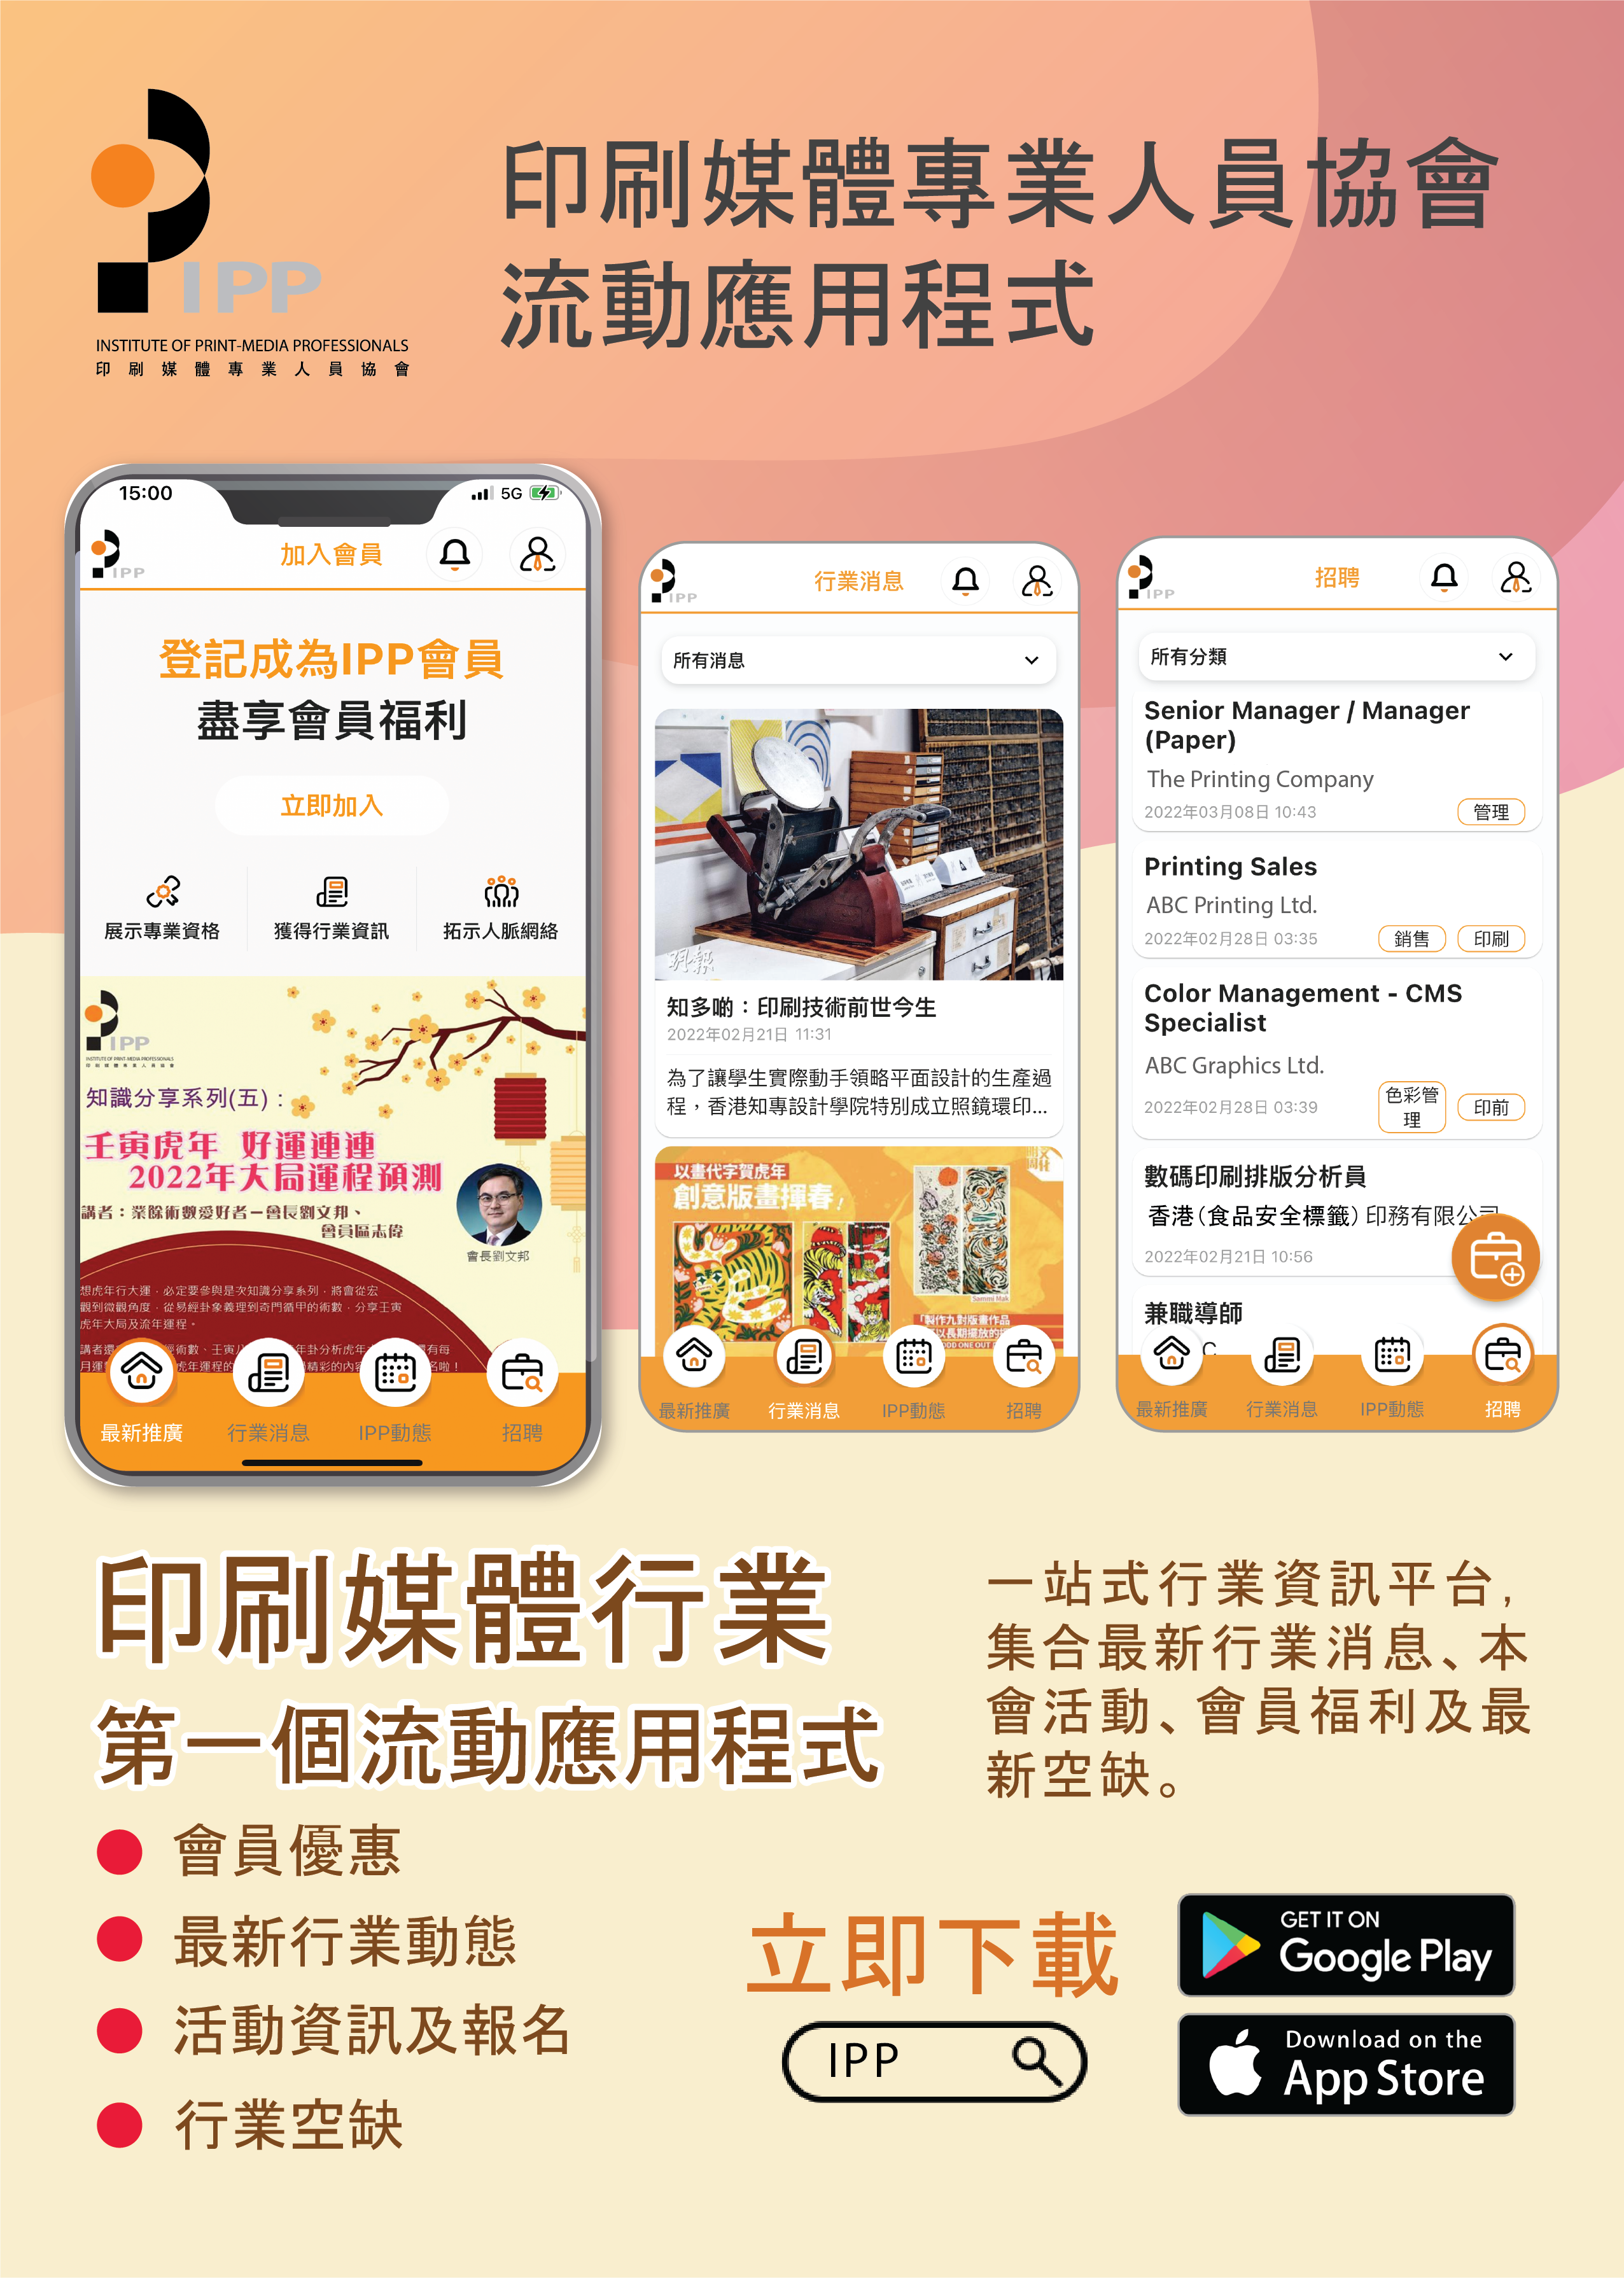 Médico entrevista Escritor IPP App is Officially Launched (The First App of HK Print-Media Industry)